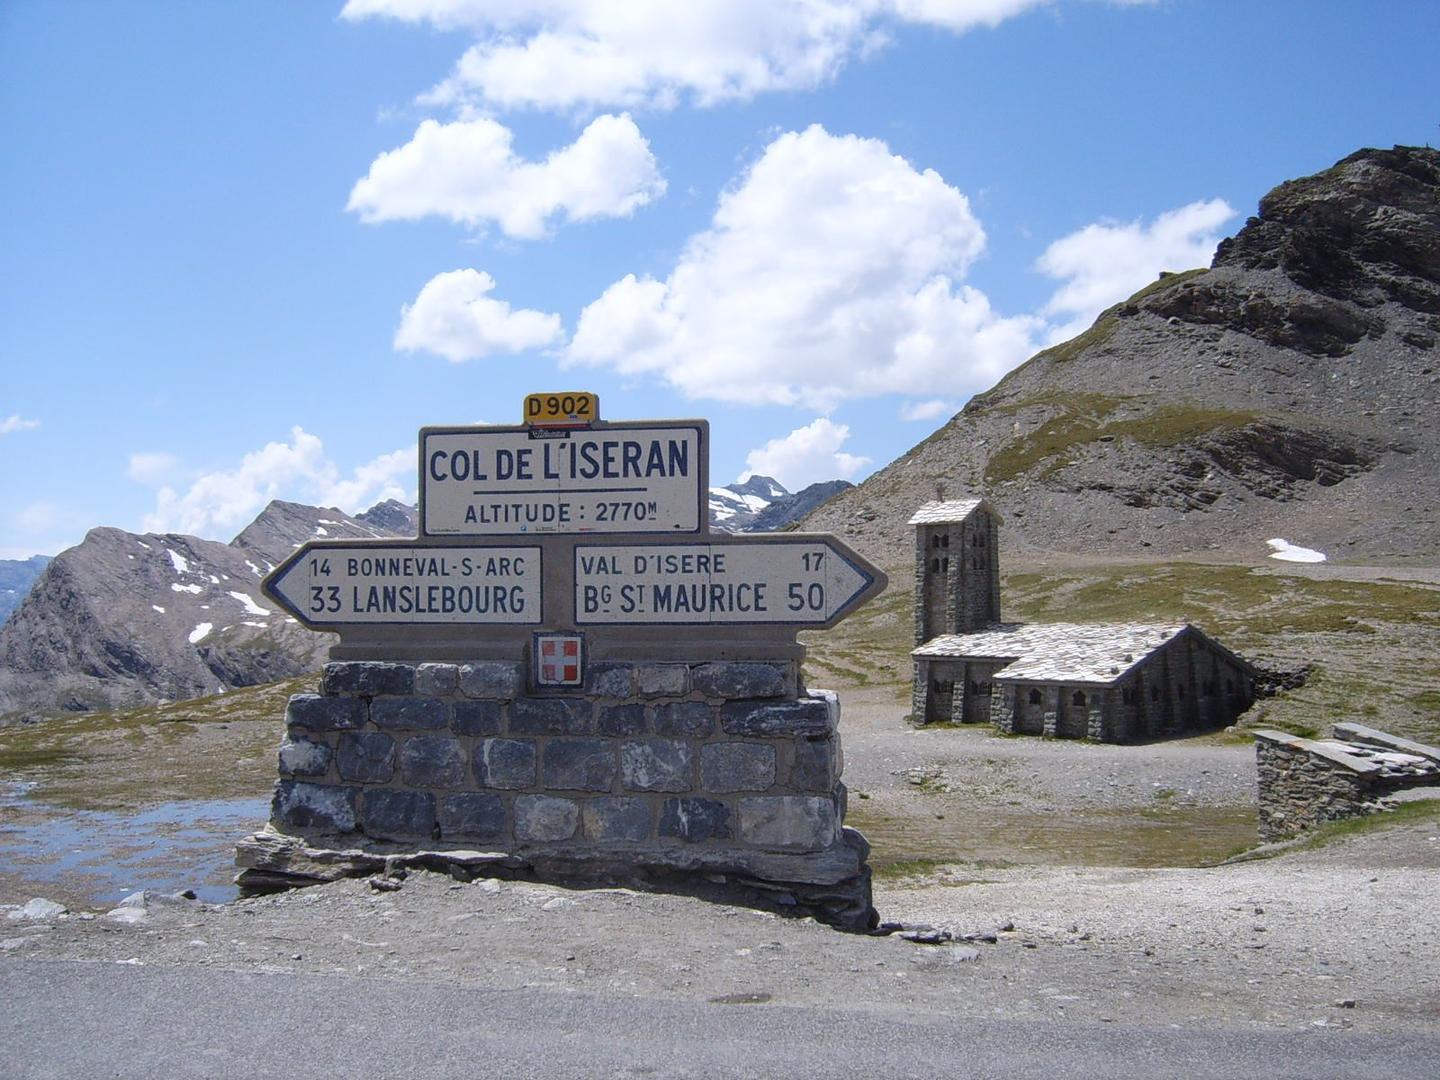 The summit sign of Col de l'Iseran at an altitude of 2770m, with a small stone chapel in the background and the surrounding Alpine landscape under a clear blue sky.